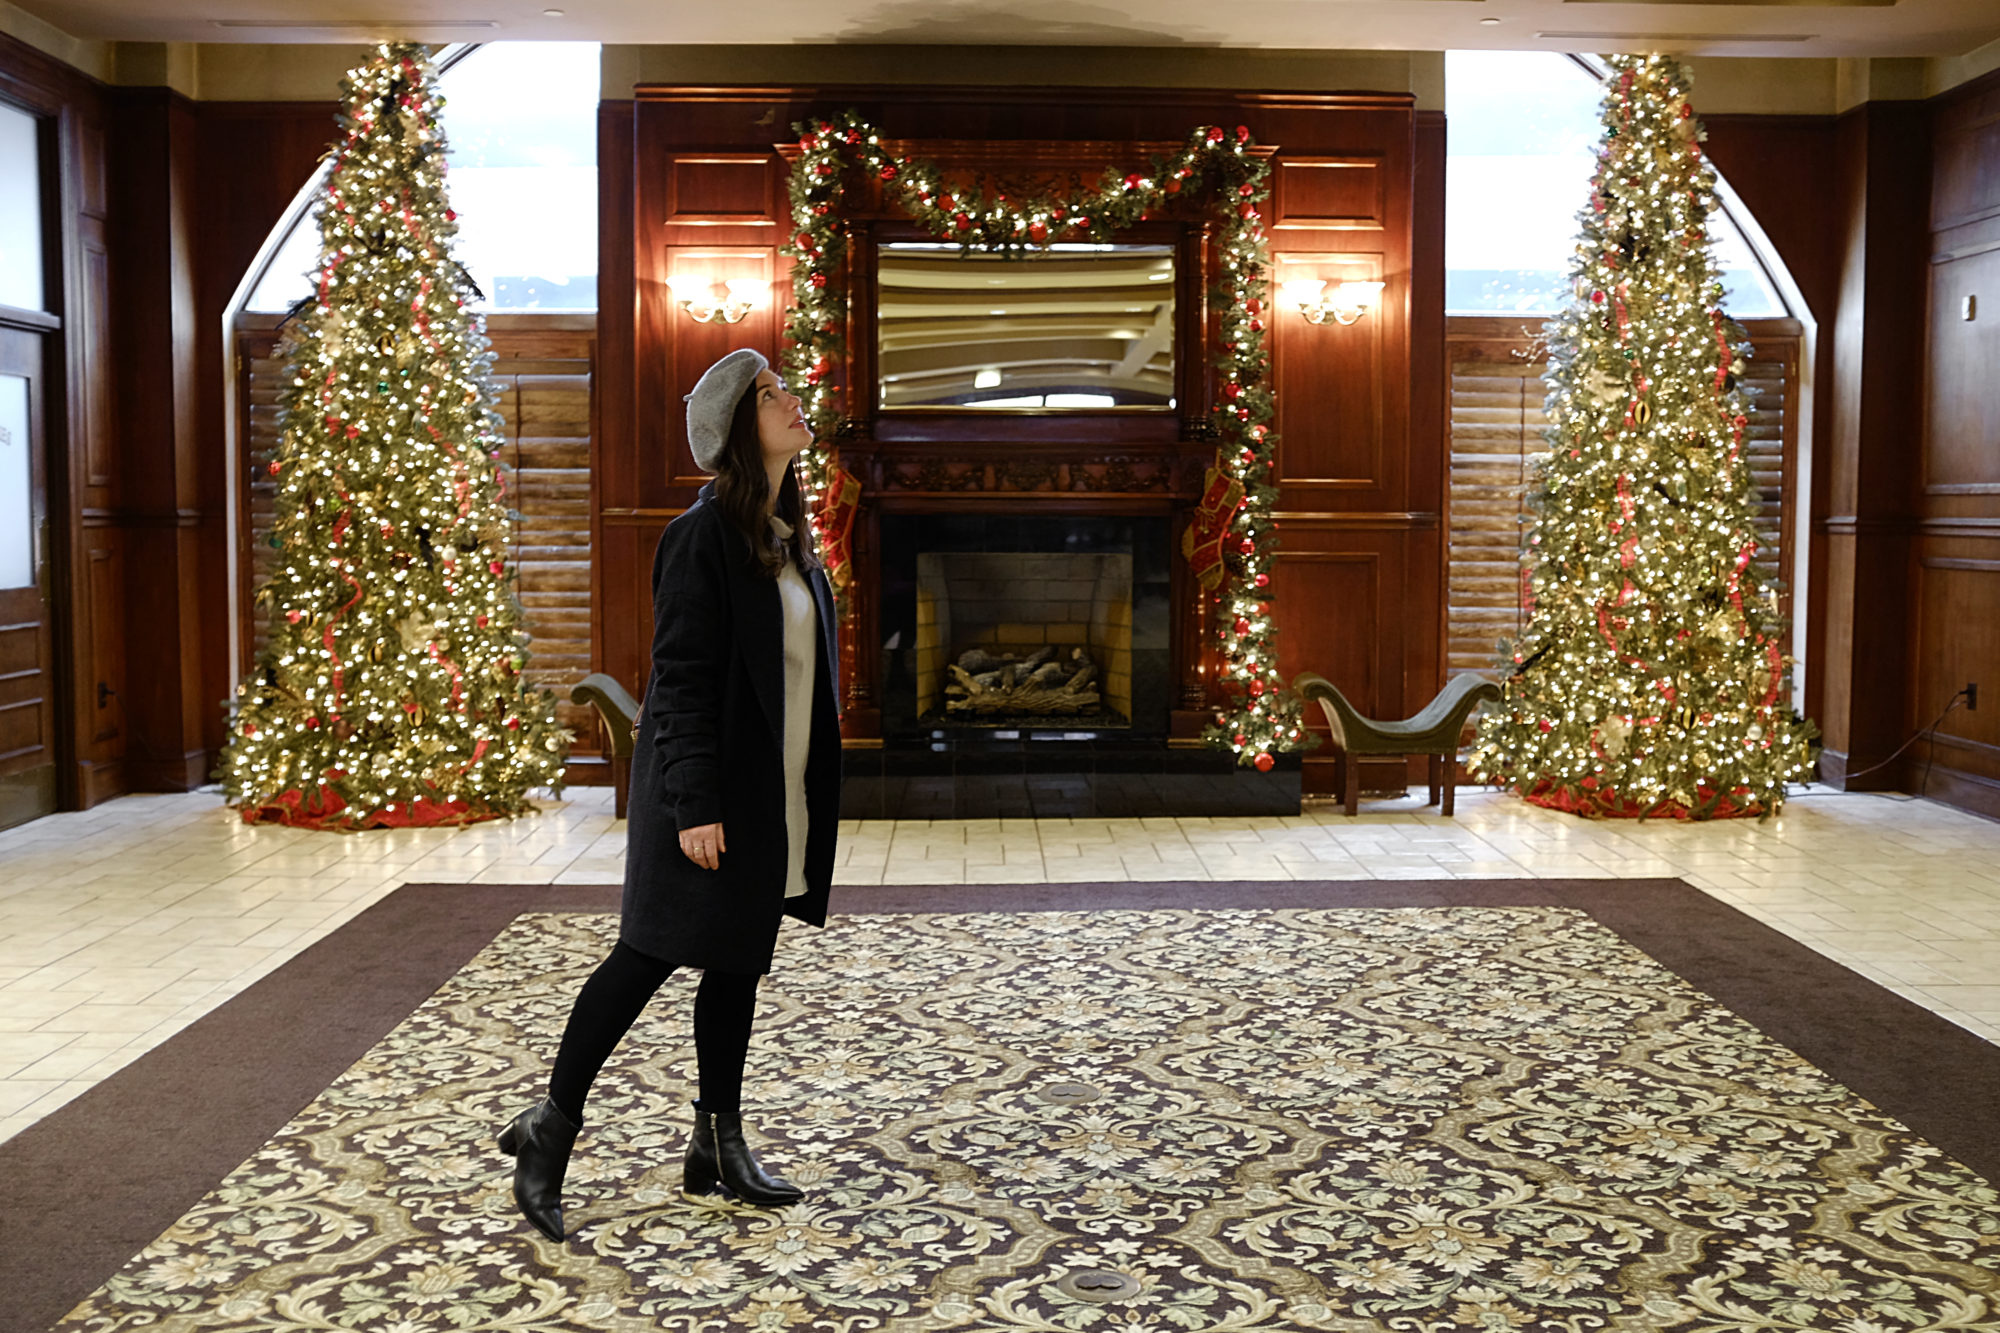 Alyssa stands in the lobby of the Carnegie Hotel at Christmastime